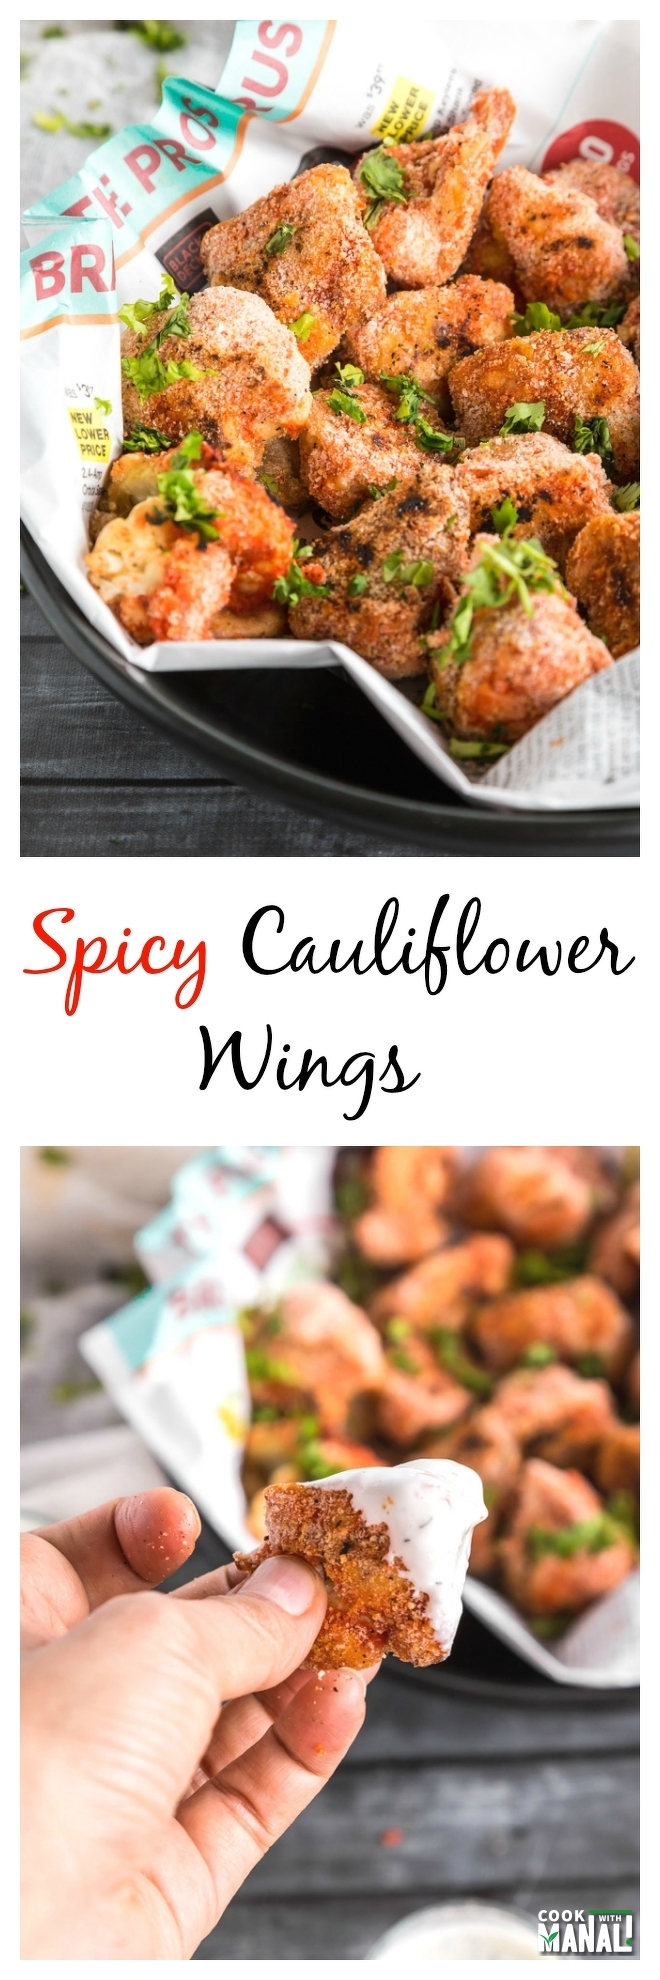 Spicy Cauliflower Wings Collage